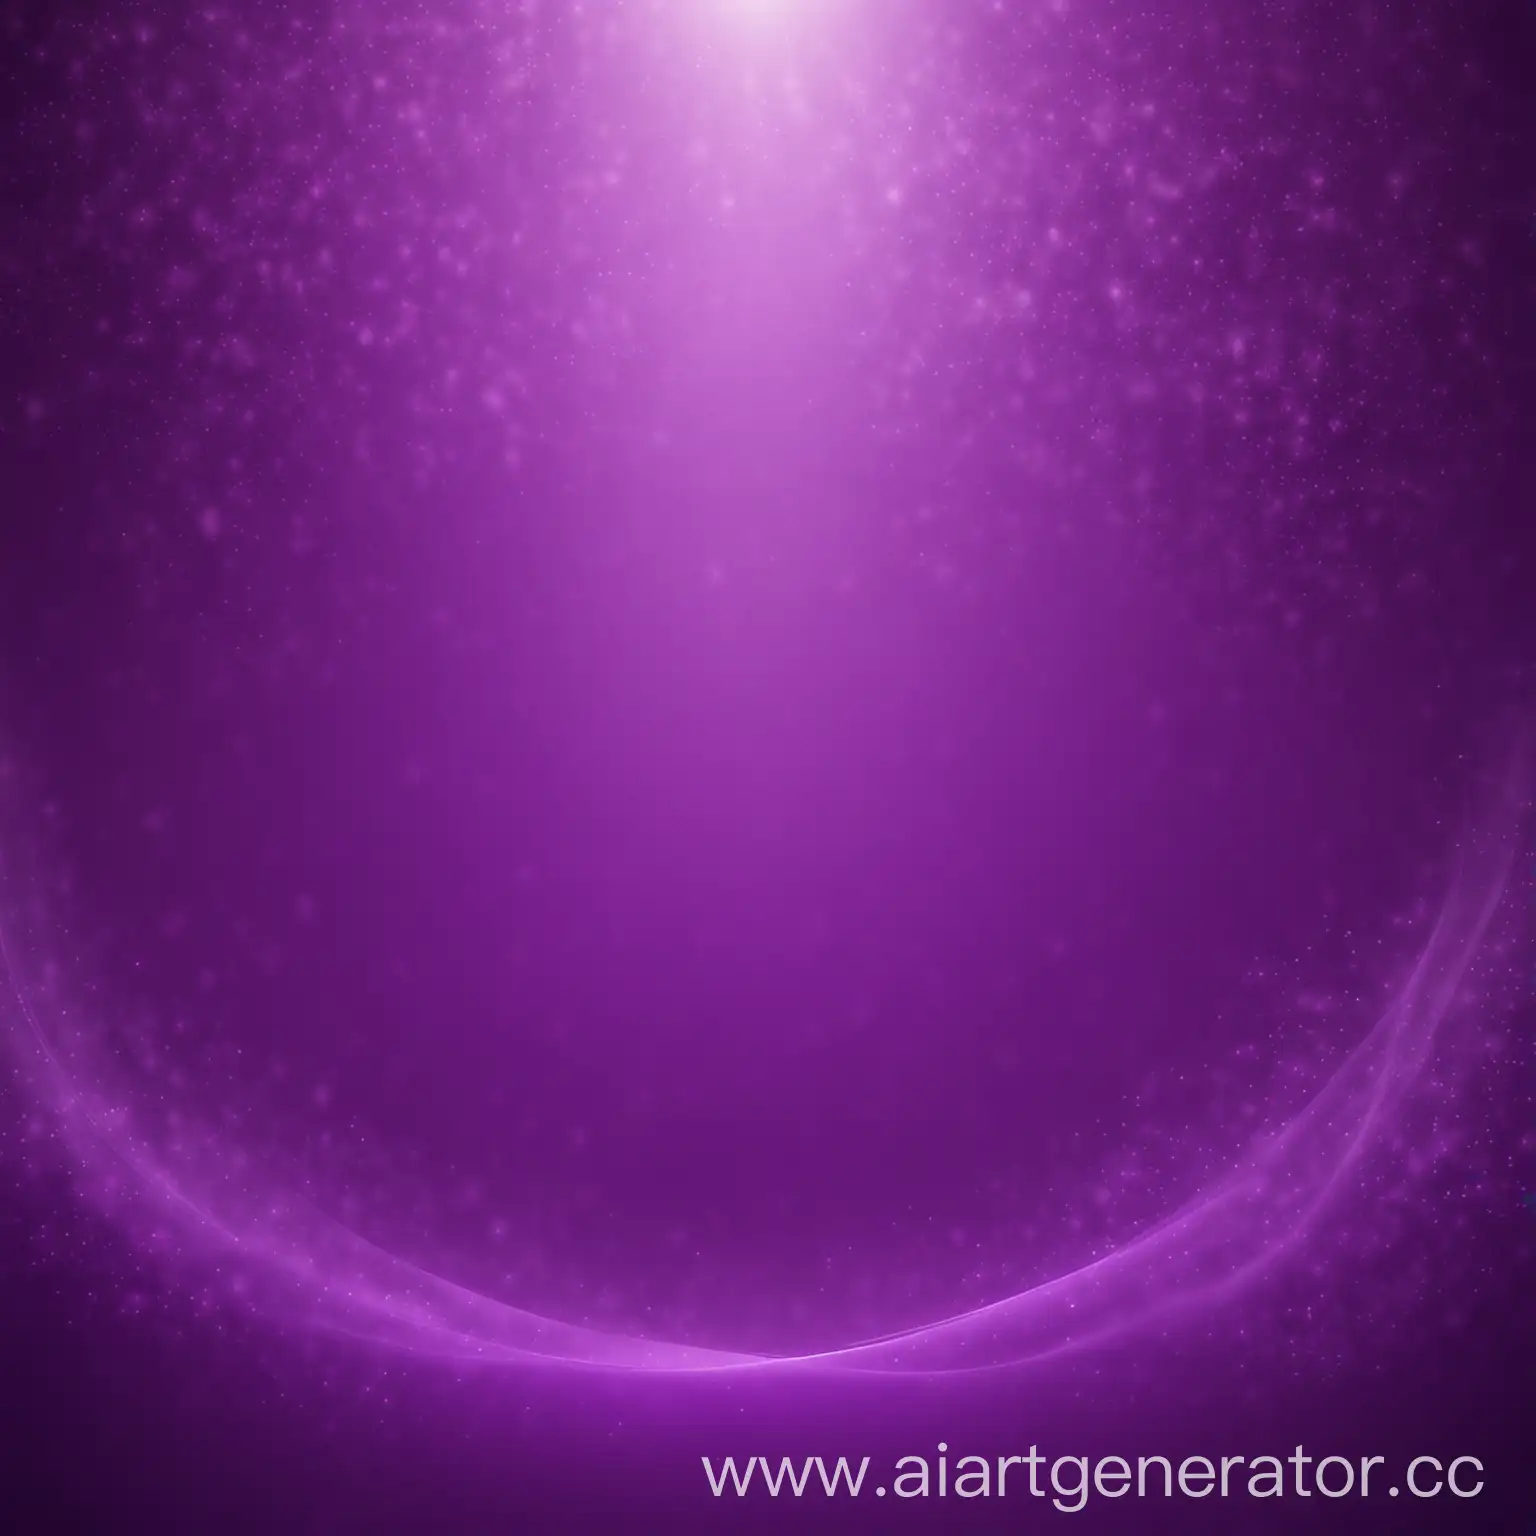 Abstract-Purple-Background-with-Ethereal-Effects